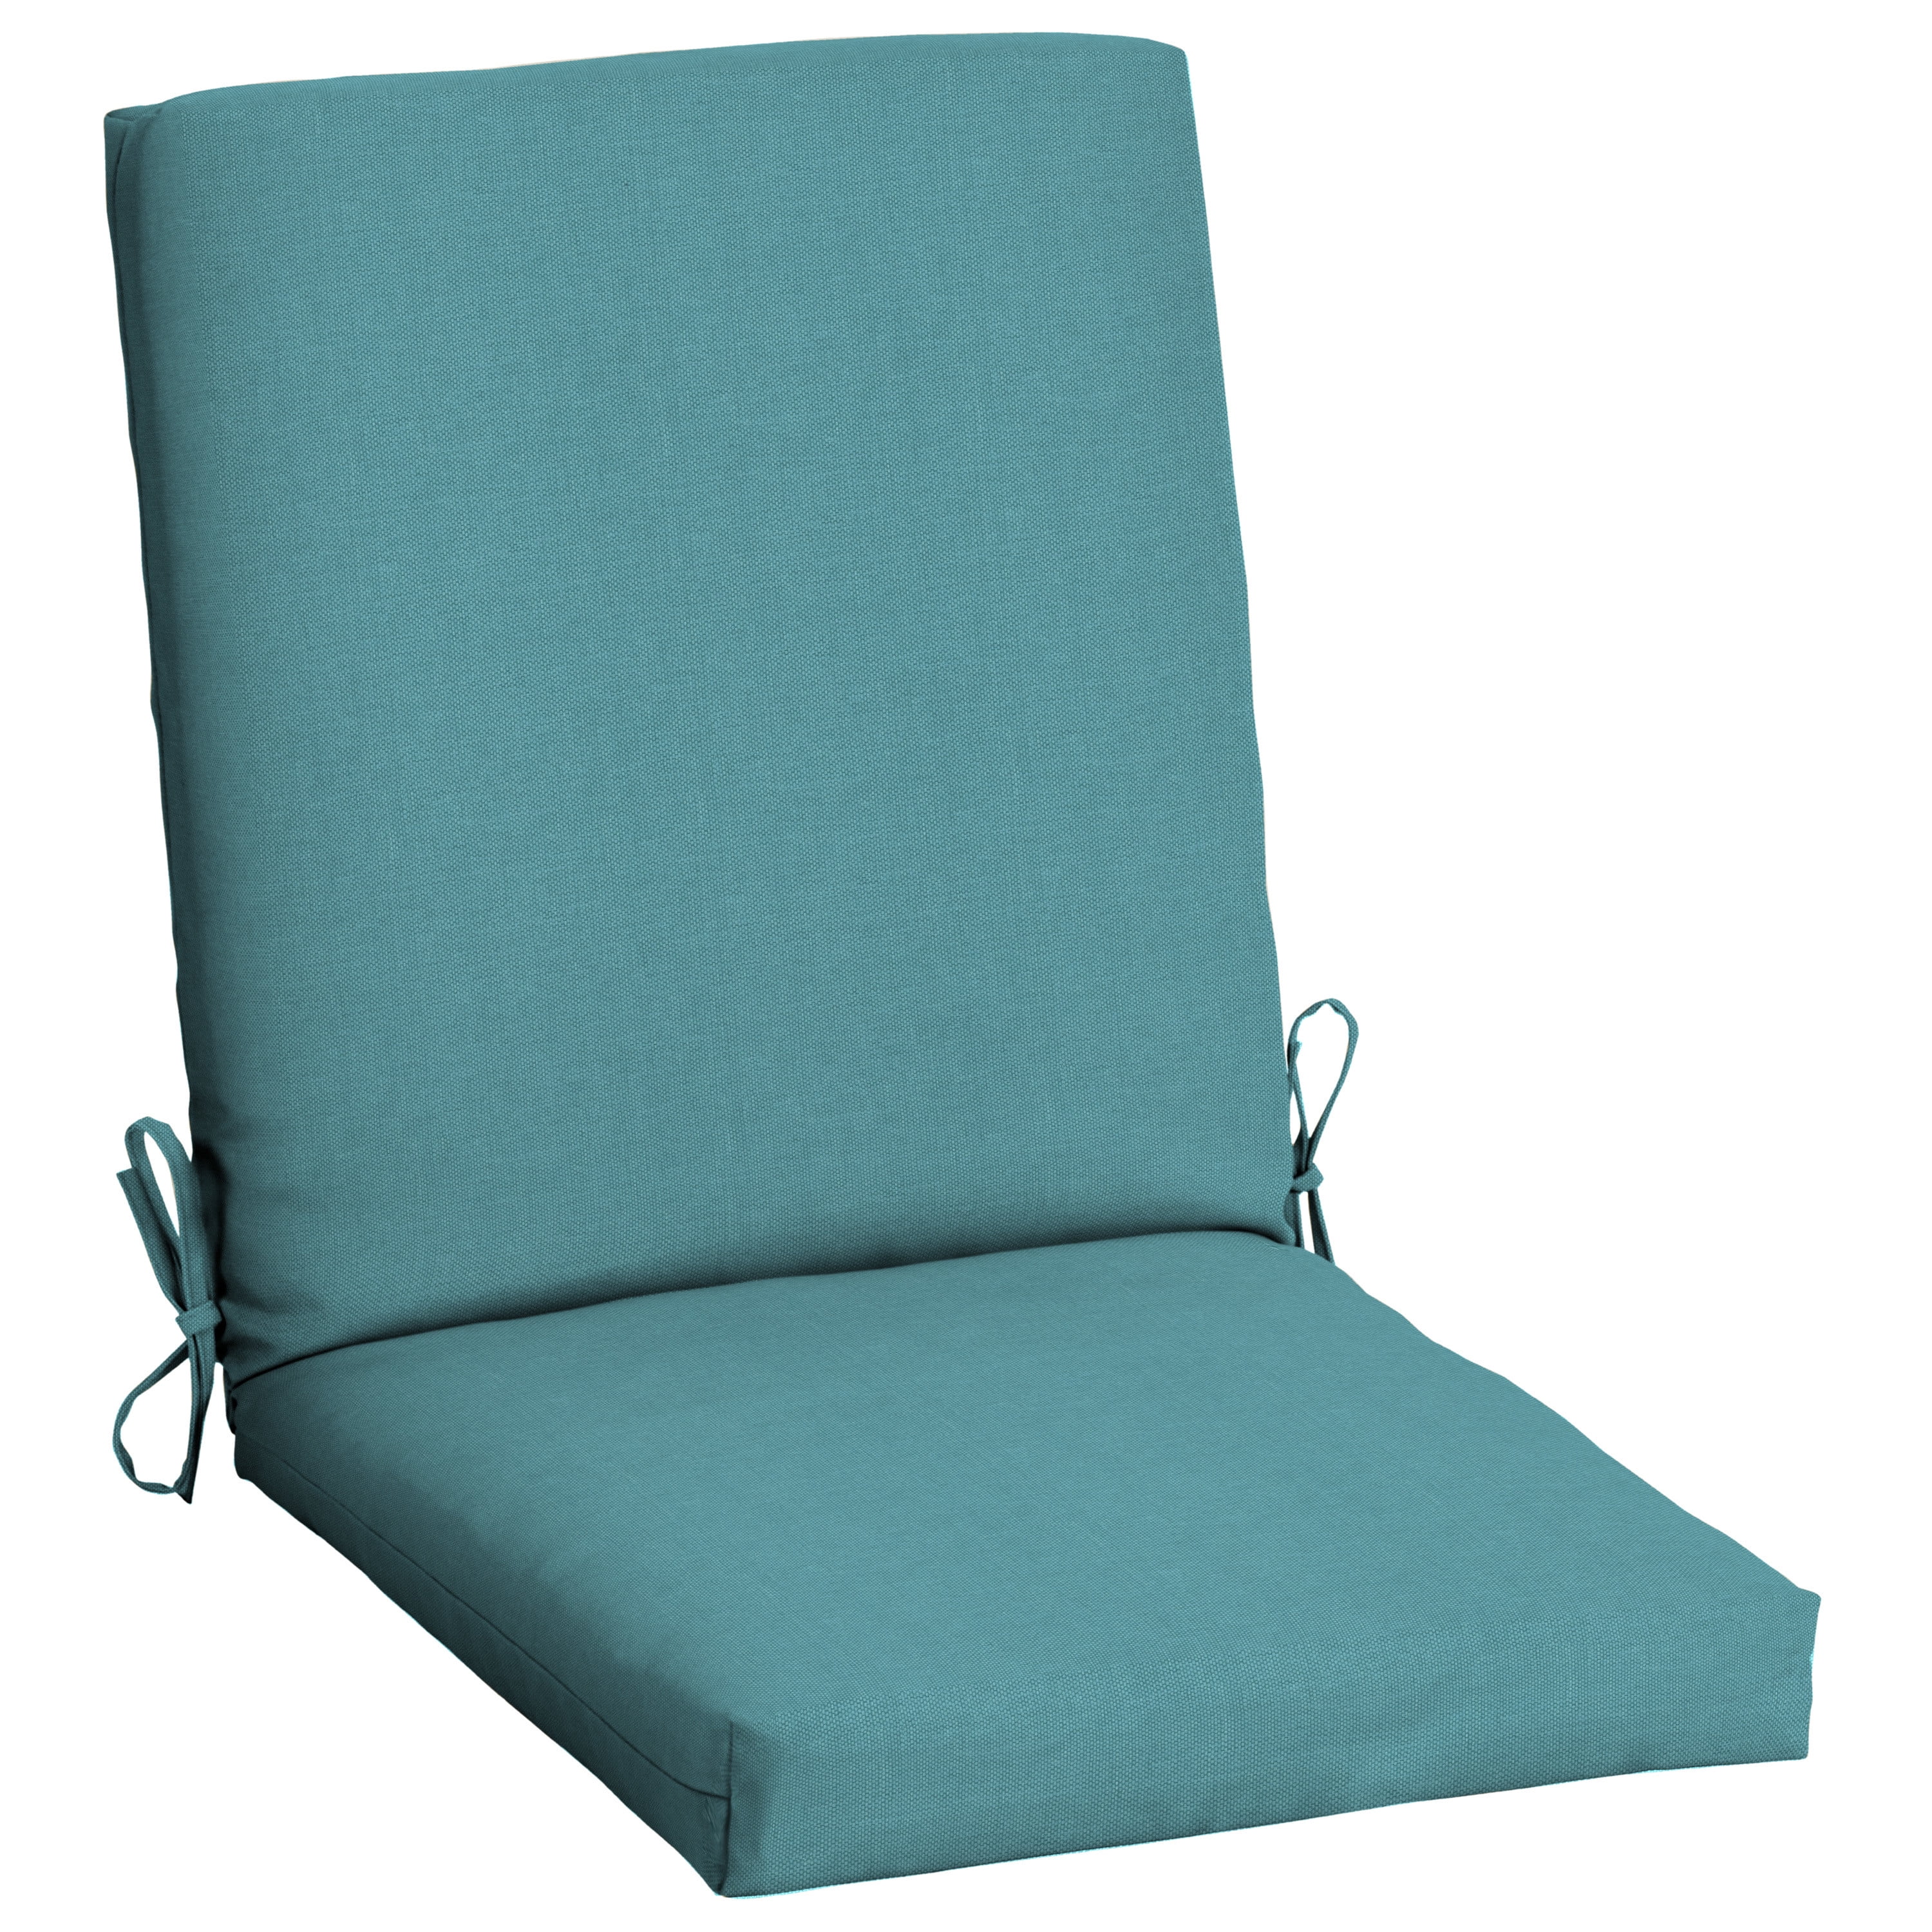 Replacement Chair Cushion - Blue/ White, Size Boxed, Sunbrella | The Company Store